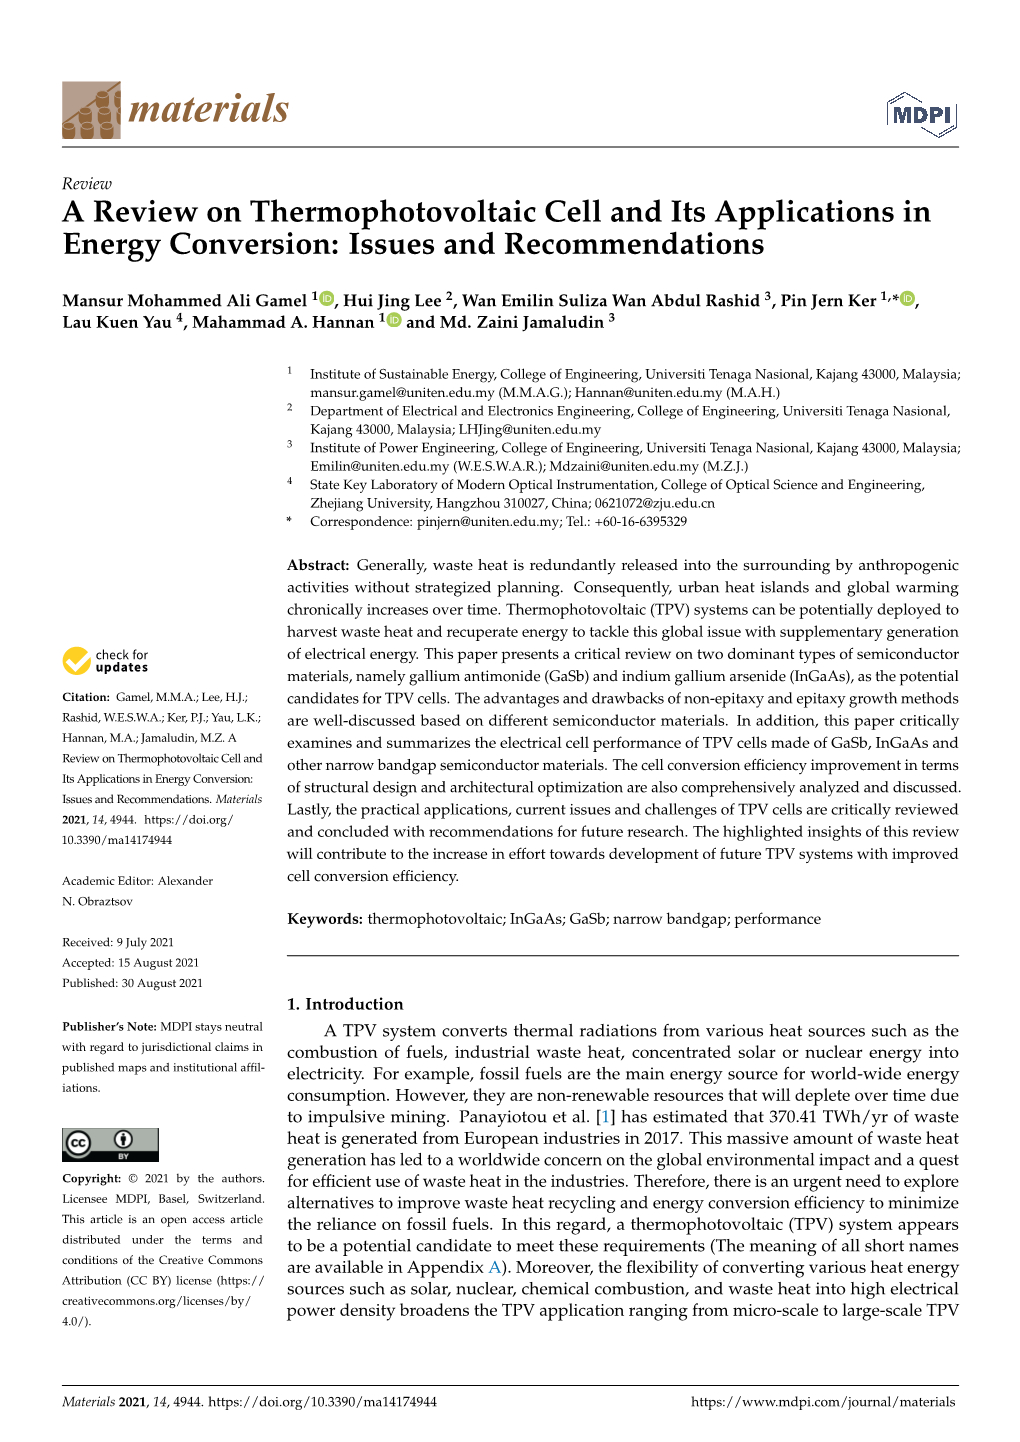 A Review on Thermophotovoltaic Cell and Its Applications in Energy Conversion: Issues and Recommendations